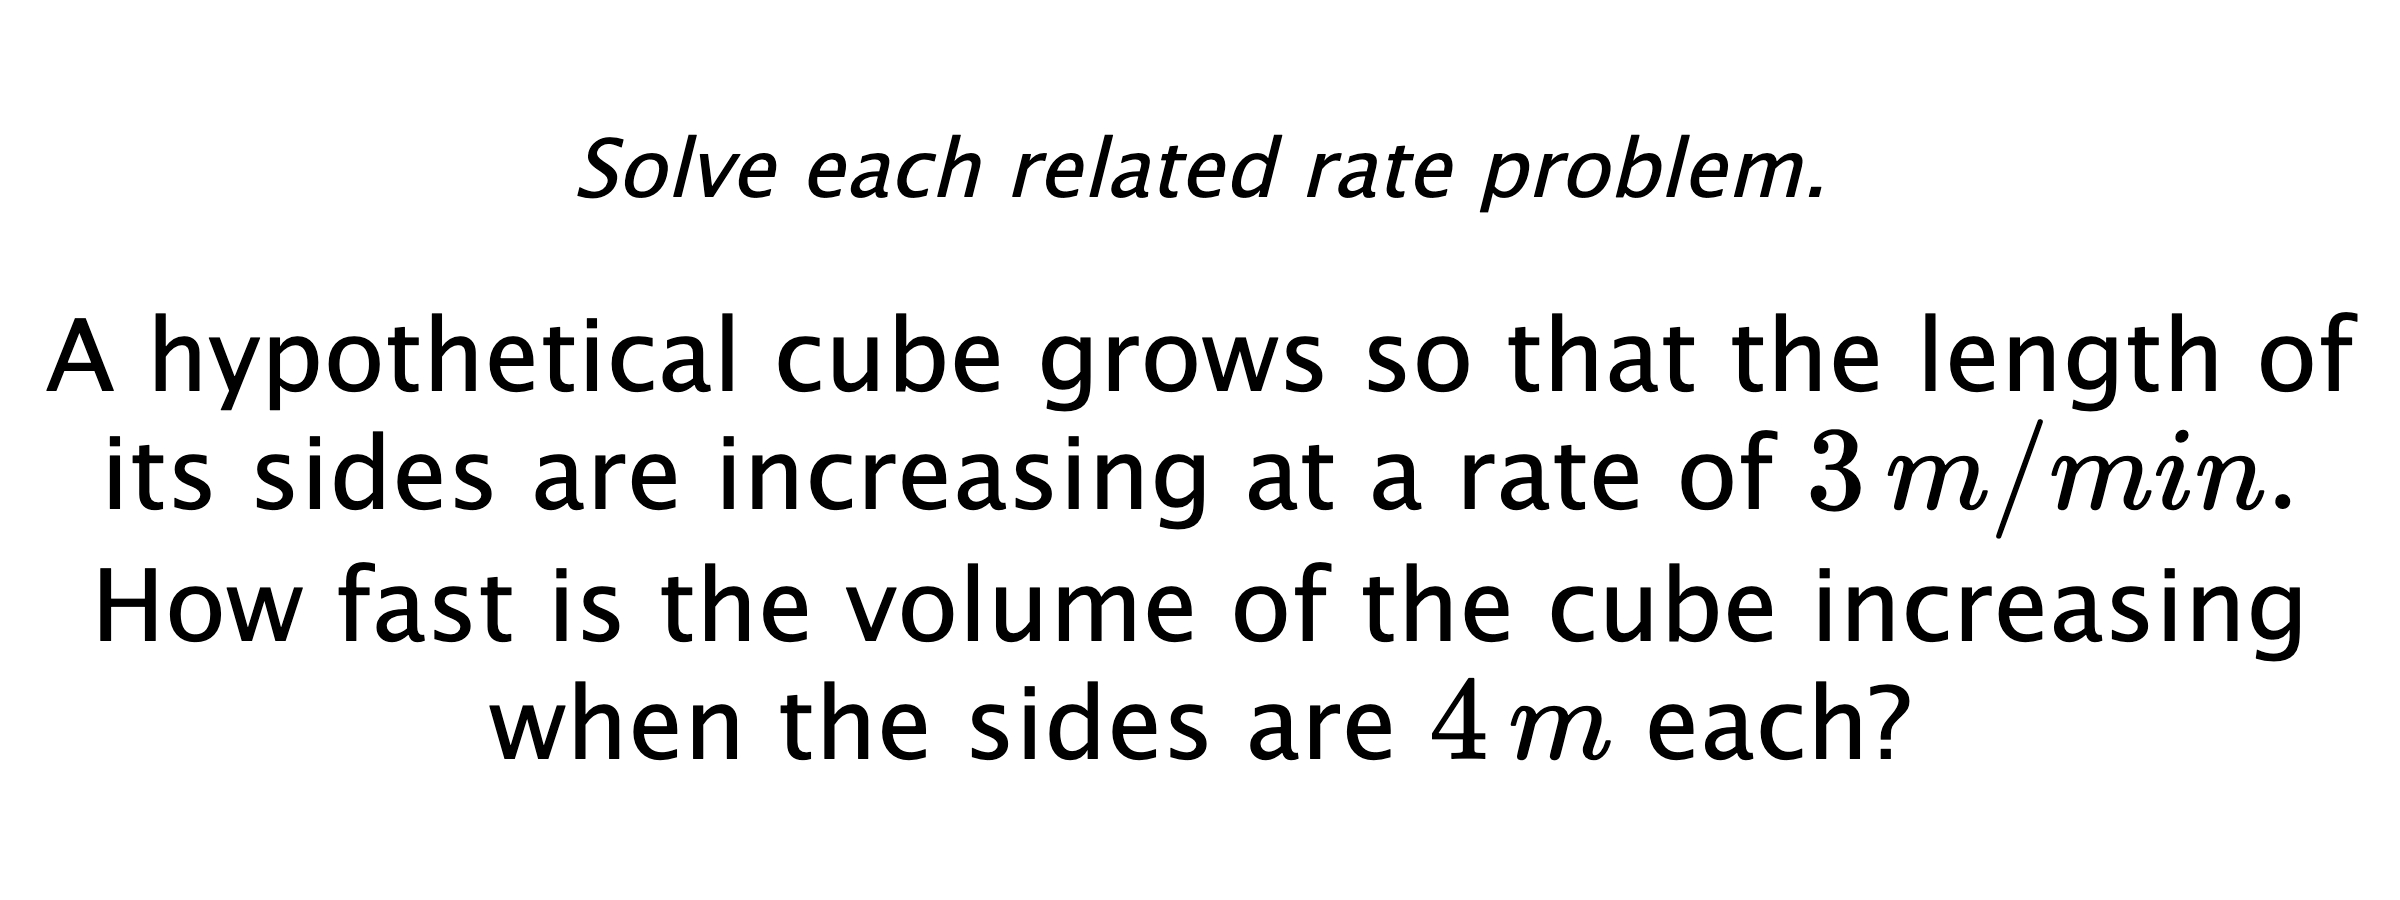 Solve each related rate problem. A hypothetical cube grows so that the length of its sides are increasing at a rate of $3\,m/min.$ How fast is the volume of the cube increasing when the sides are $4\,m$ each?